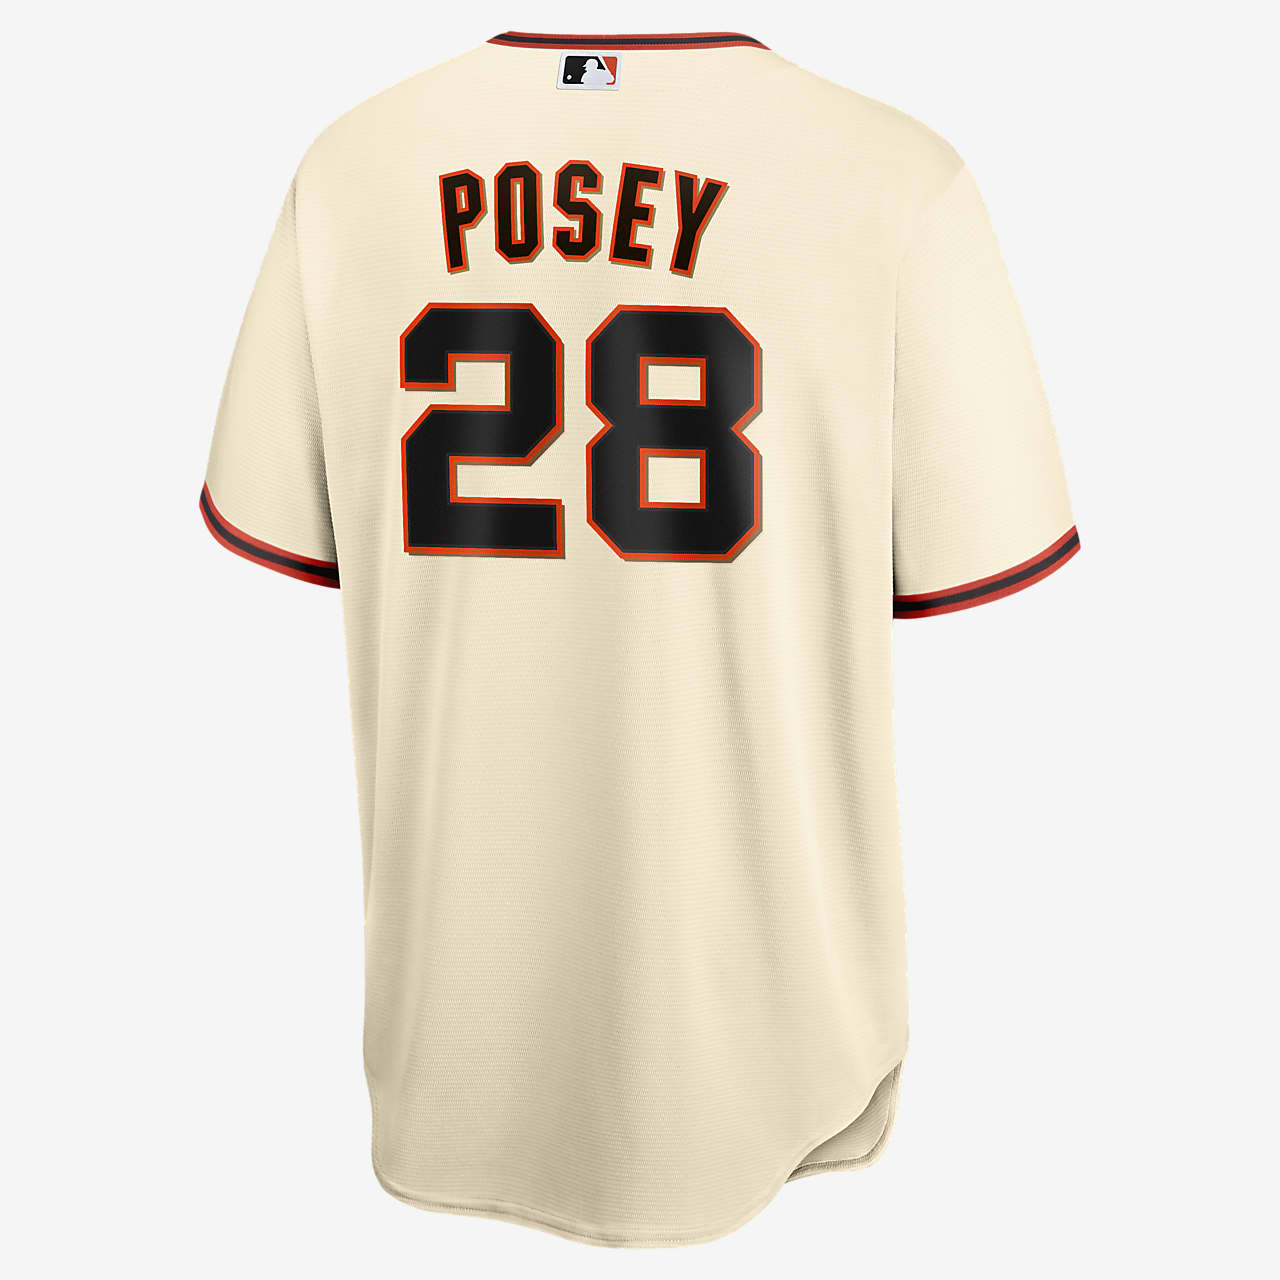 san francisco giants pullover jersey